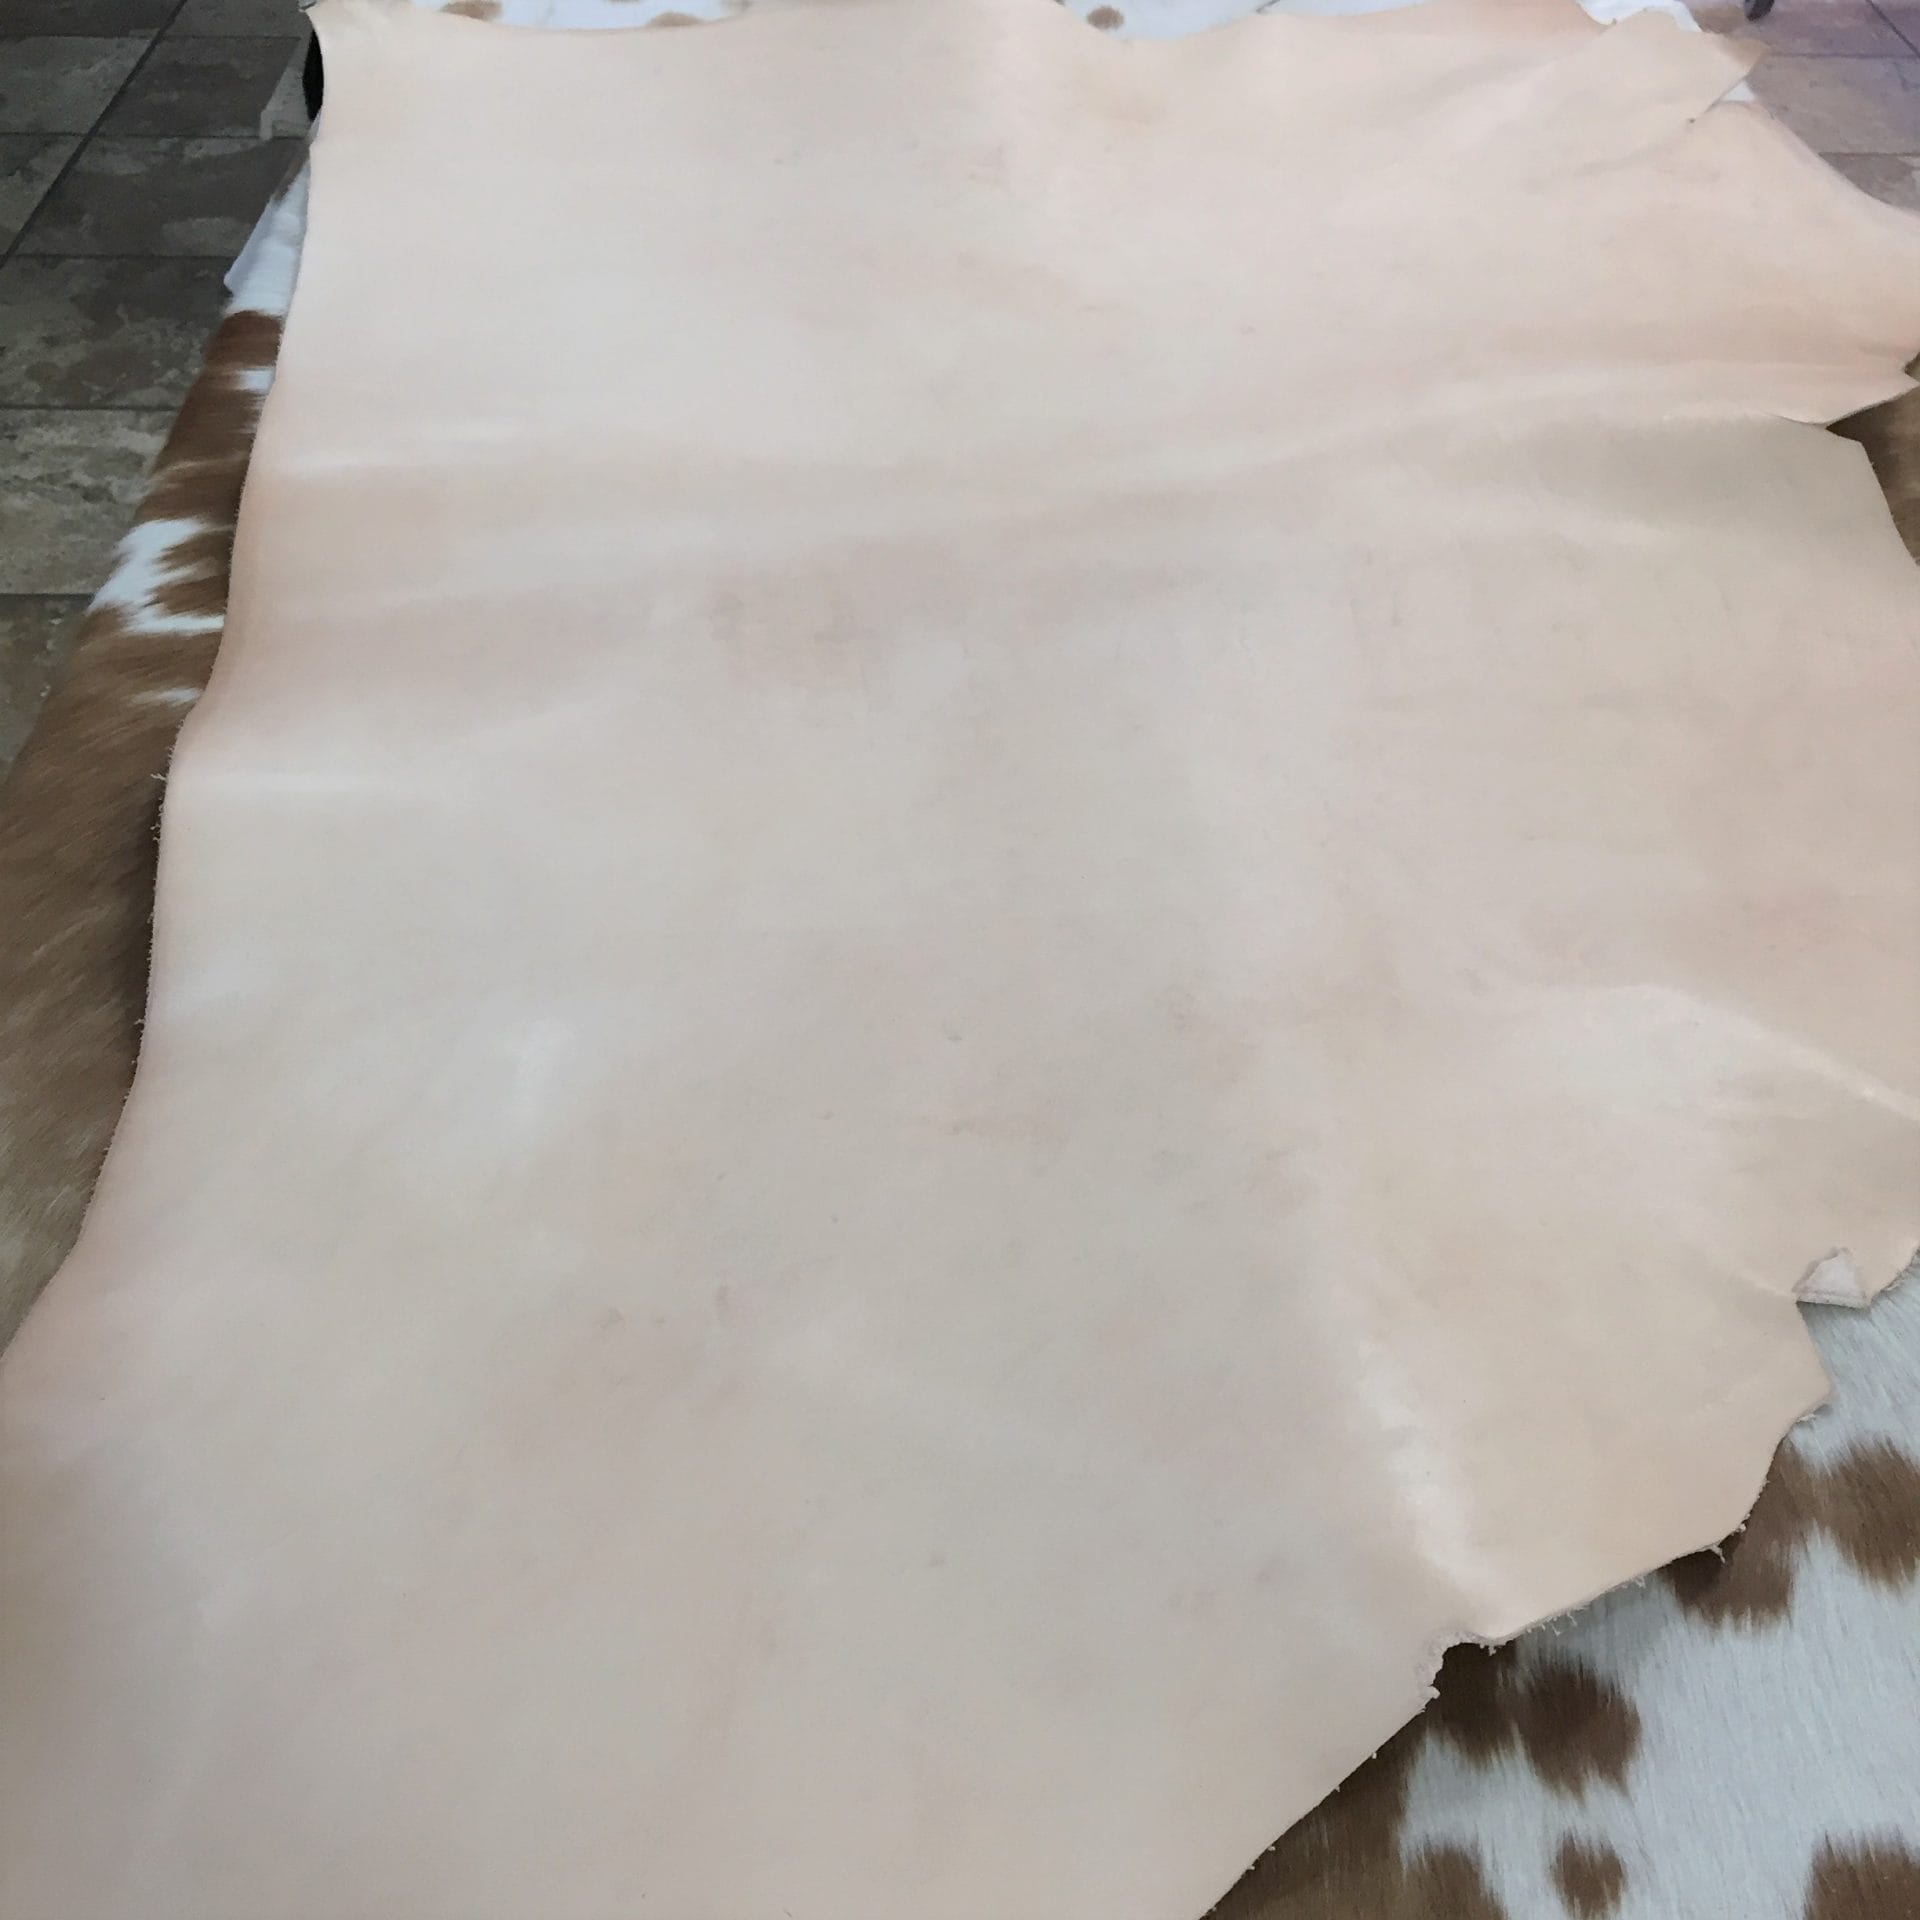 CP 4-5oz Veg Tan Leather - Tooling Leather Sheet - Rawhide Cowhide (12 x 24)